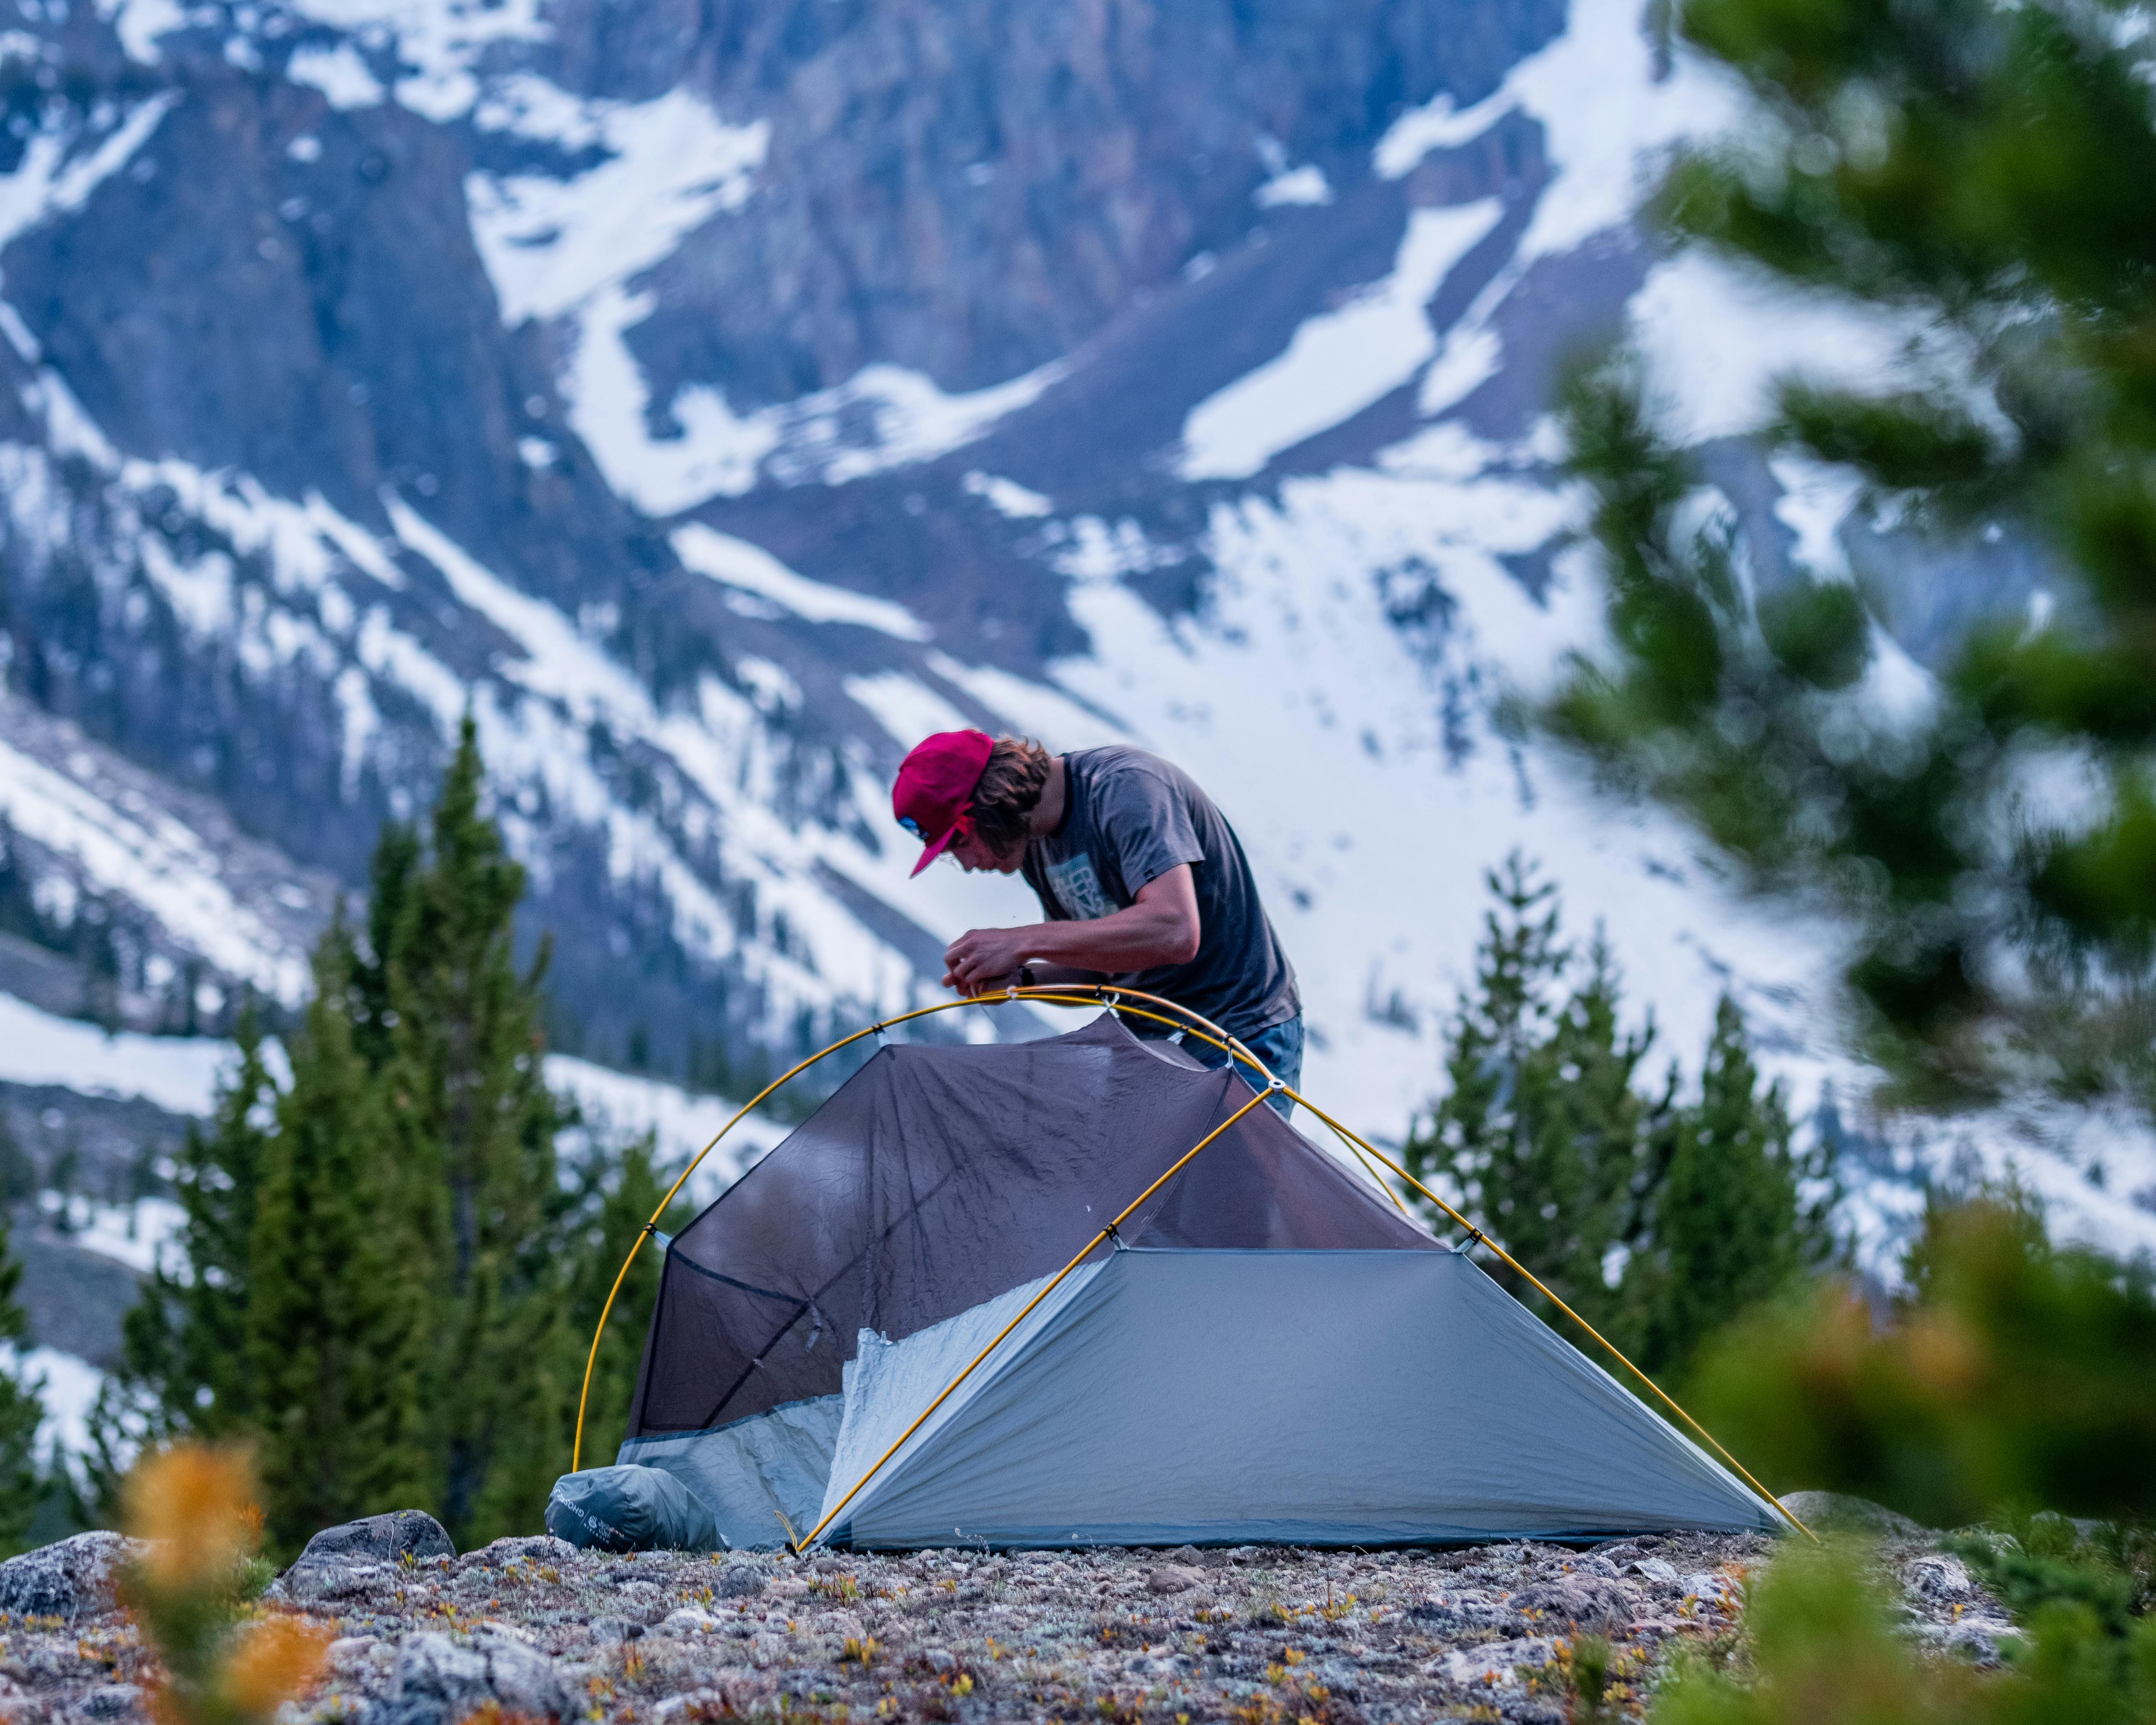 Curated expert Kael Van Buskirk building his tent with dramatic mountain scenery in the background